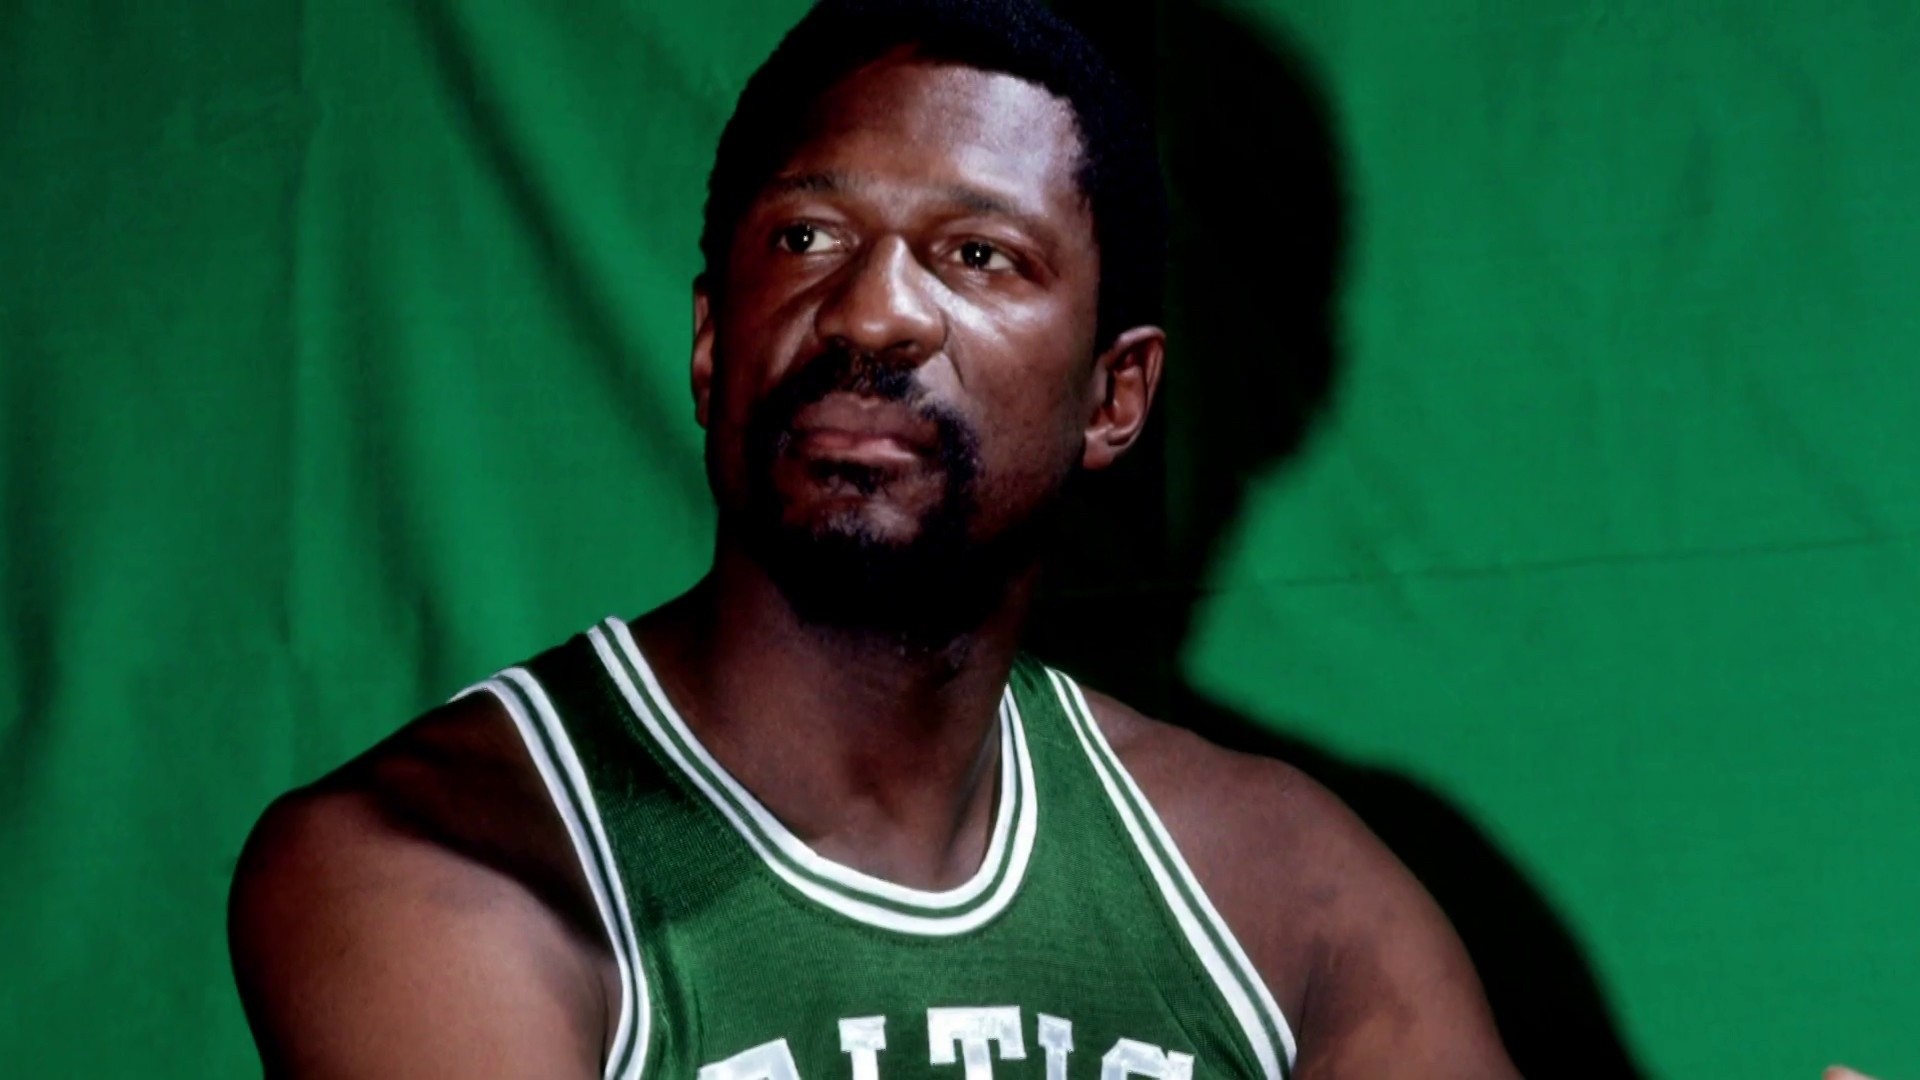 Bill Russell's Number 6 Will Be Retired Across All NBA Teams